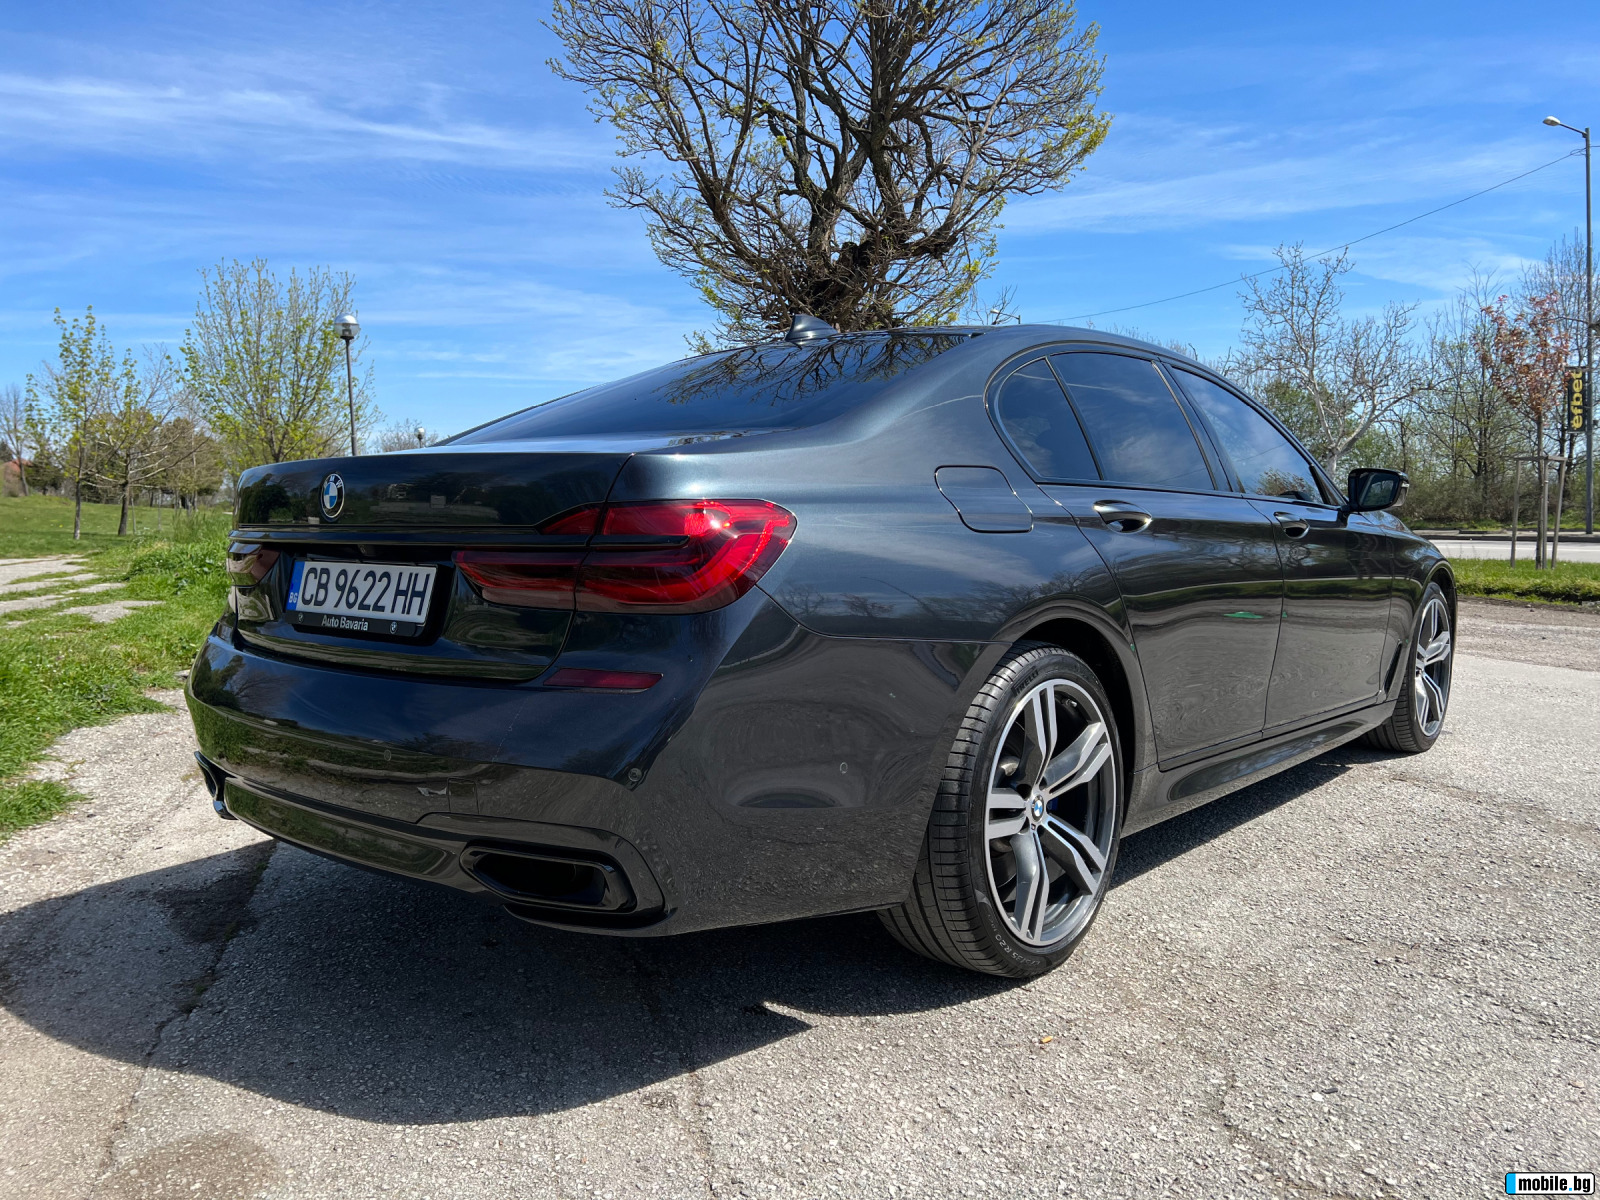 BMW 740 Drive! M package | Mobile.bg   11